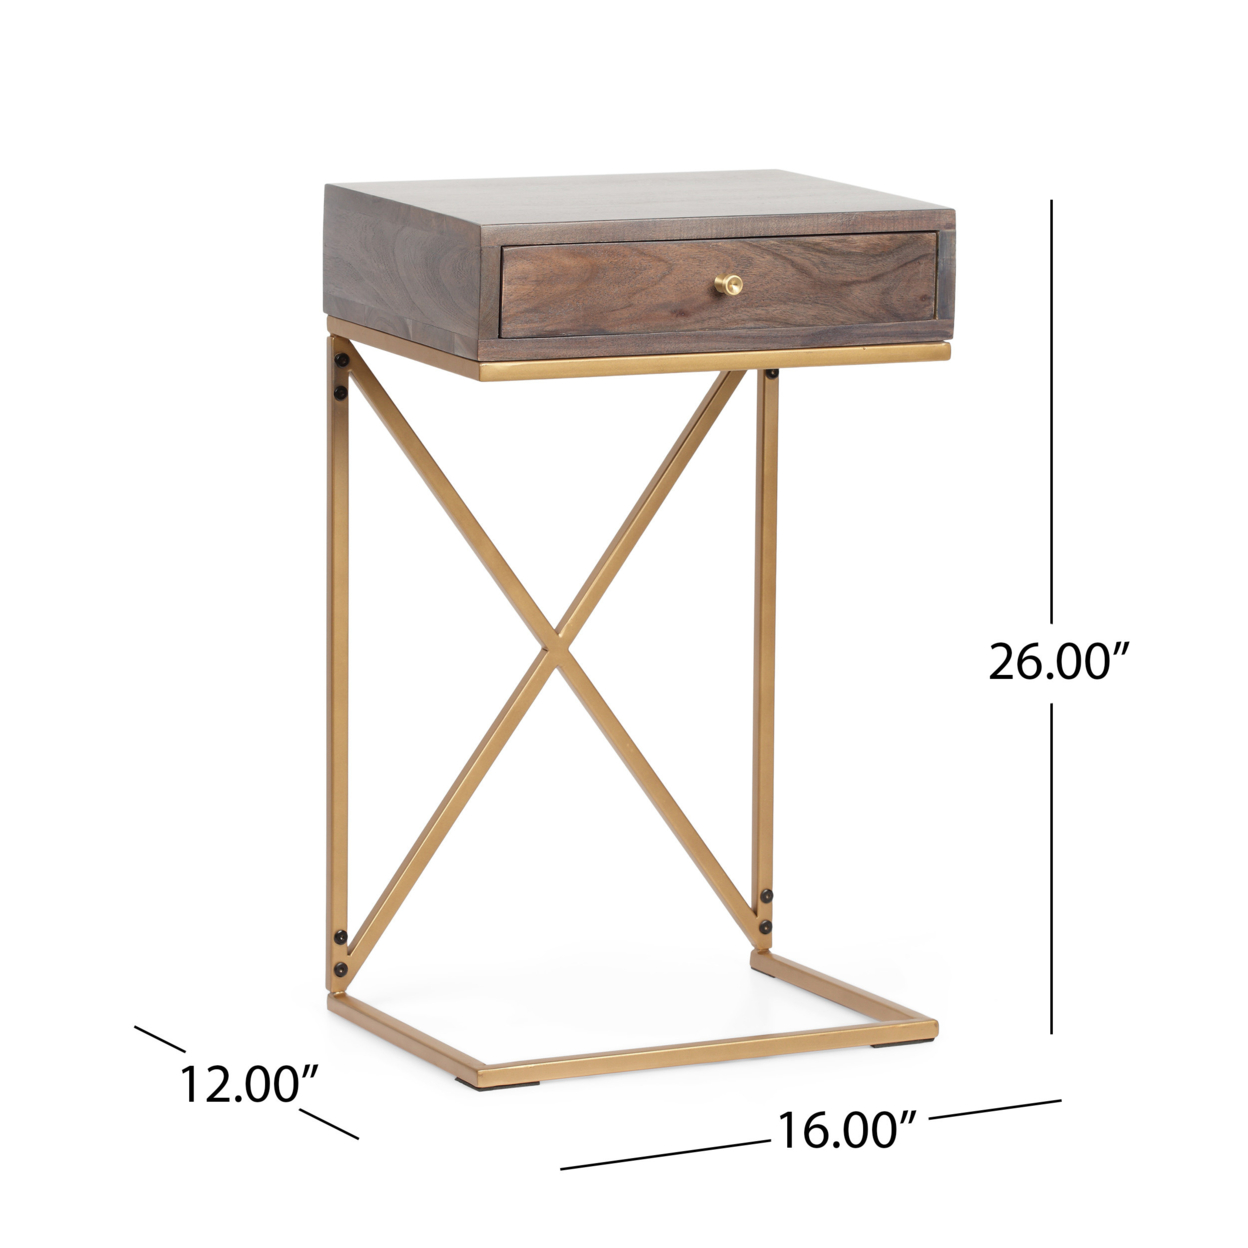 Darke Rustic Glam Handcrafted Acacia Wood C-Shaped Side Table, Dark Brown And Gold